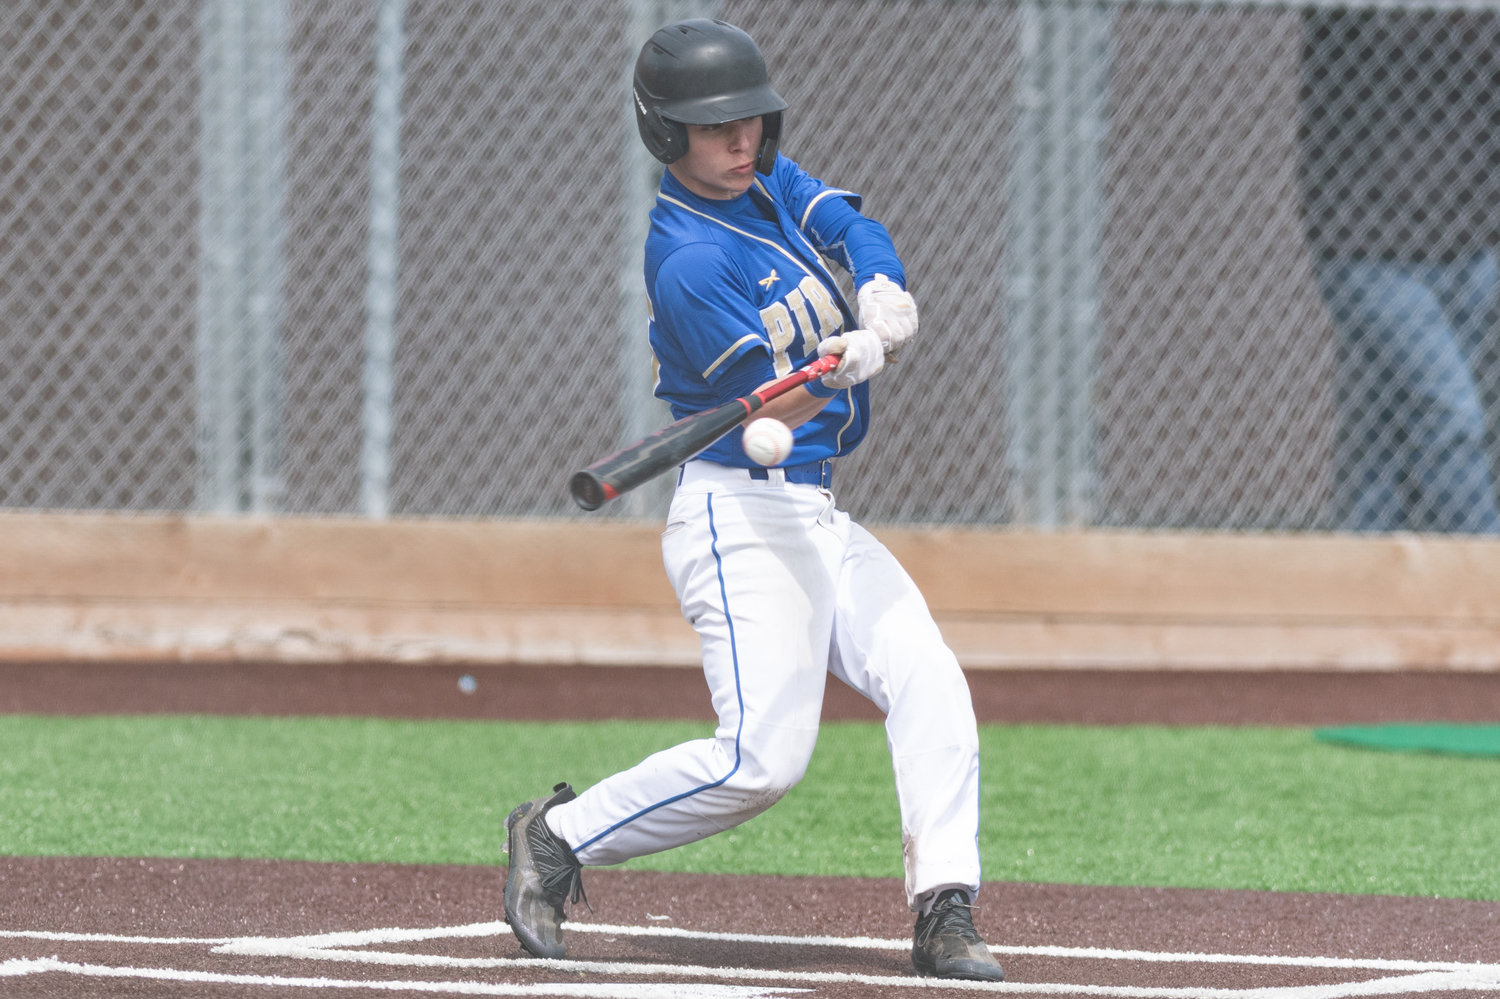 Adna's Luke Mohney makes contact with a pitch against Forks in the District 4 quarterfinals at Shelton High School May 7.